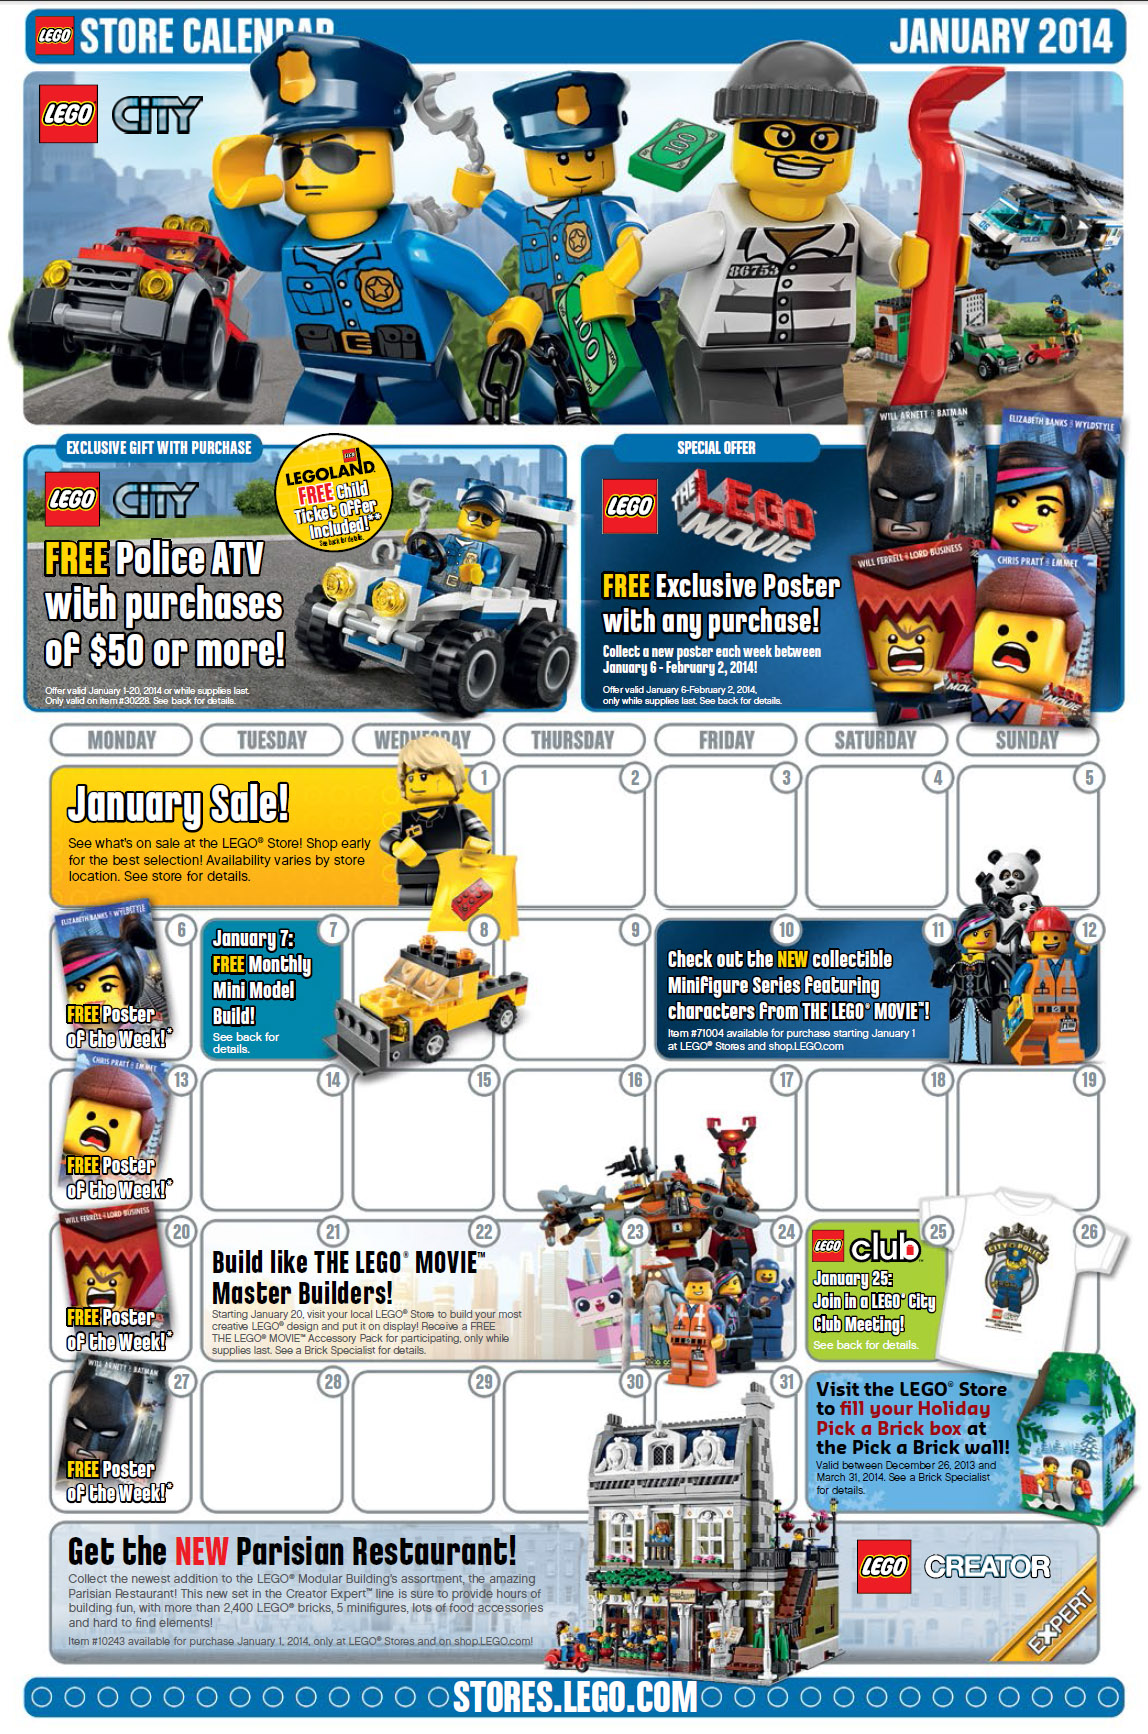 January-2014-LEGO-Stores-Calendar-Front.